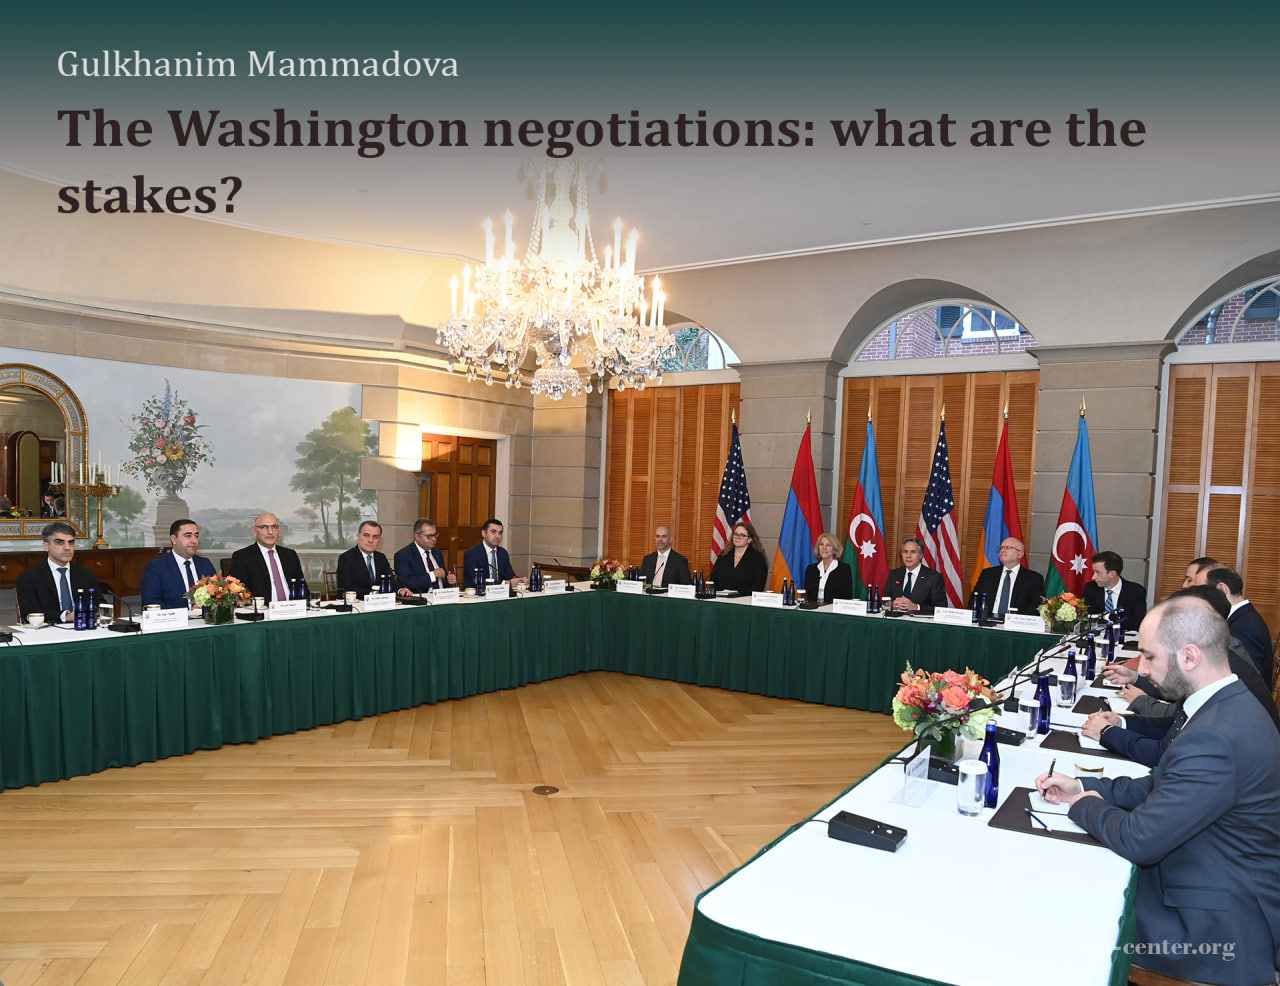 The Washington negotiations: what are the stakes?